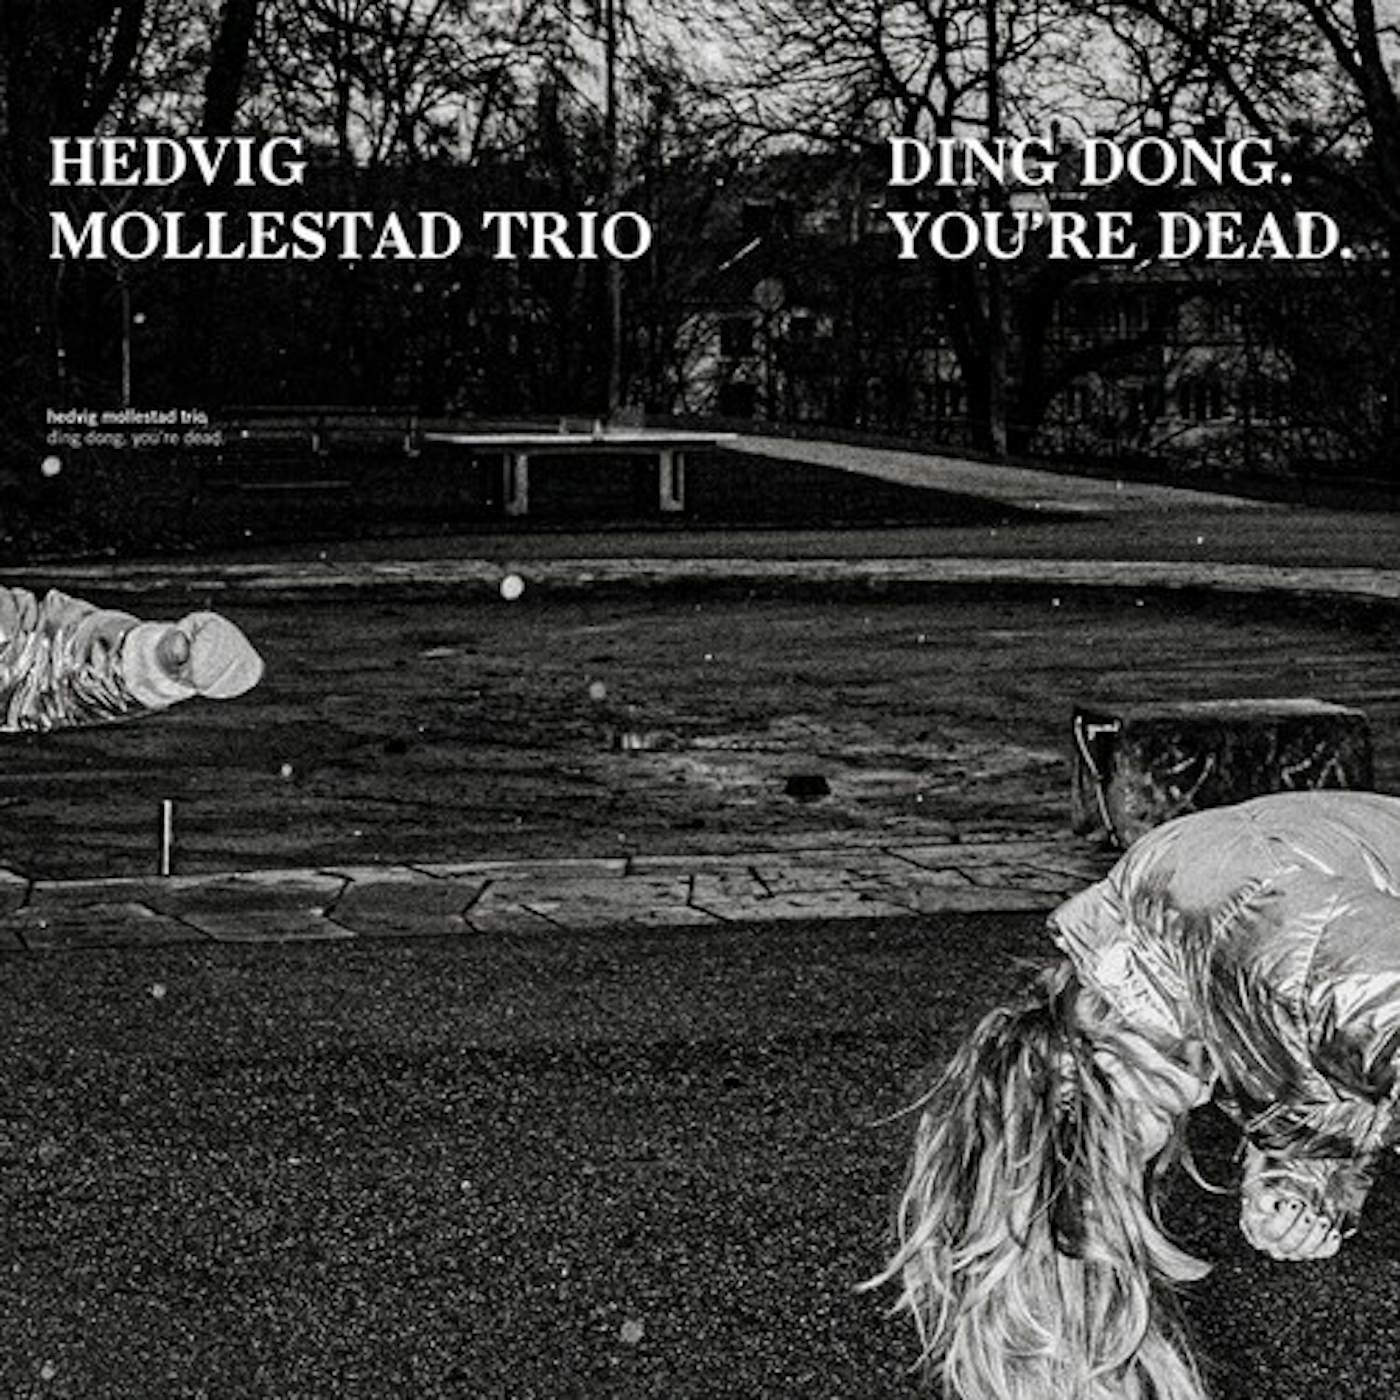 Hedvig Mollestad Trio DING DONG YOU'RE DEAD (CLEAR VINYL)